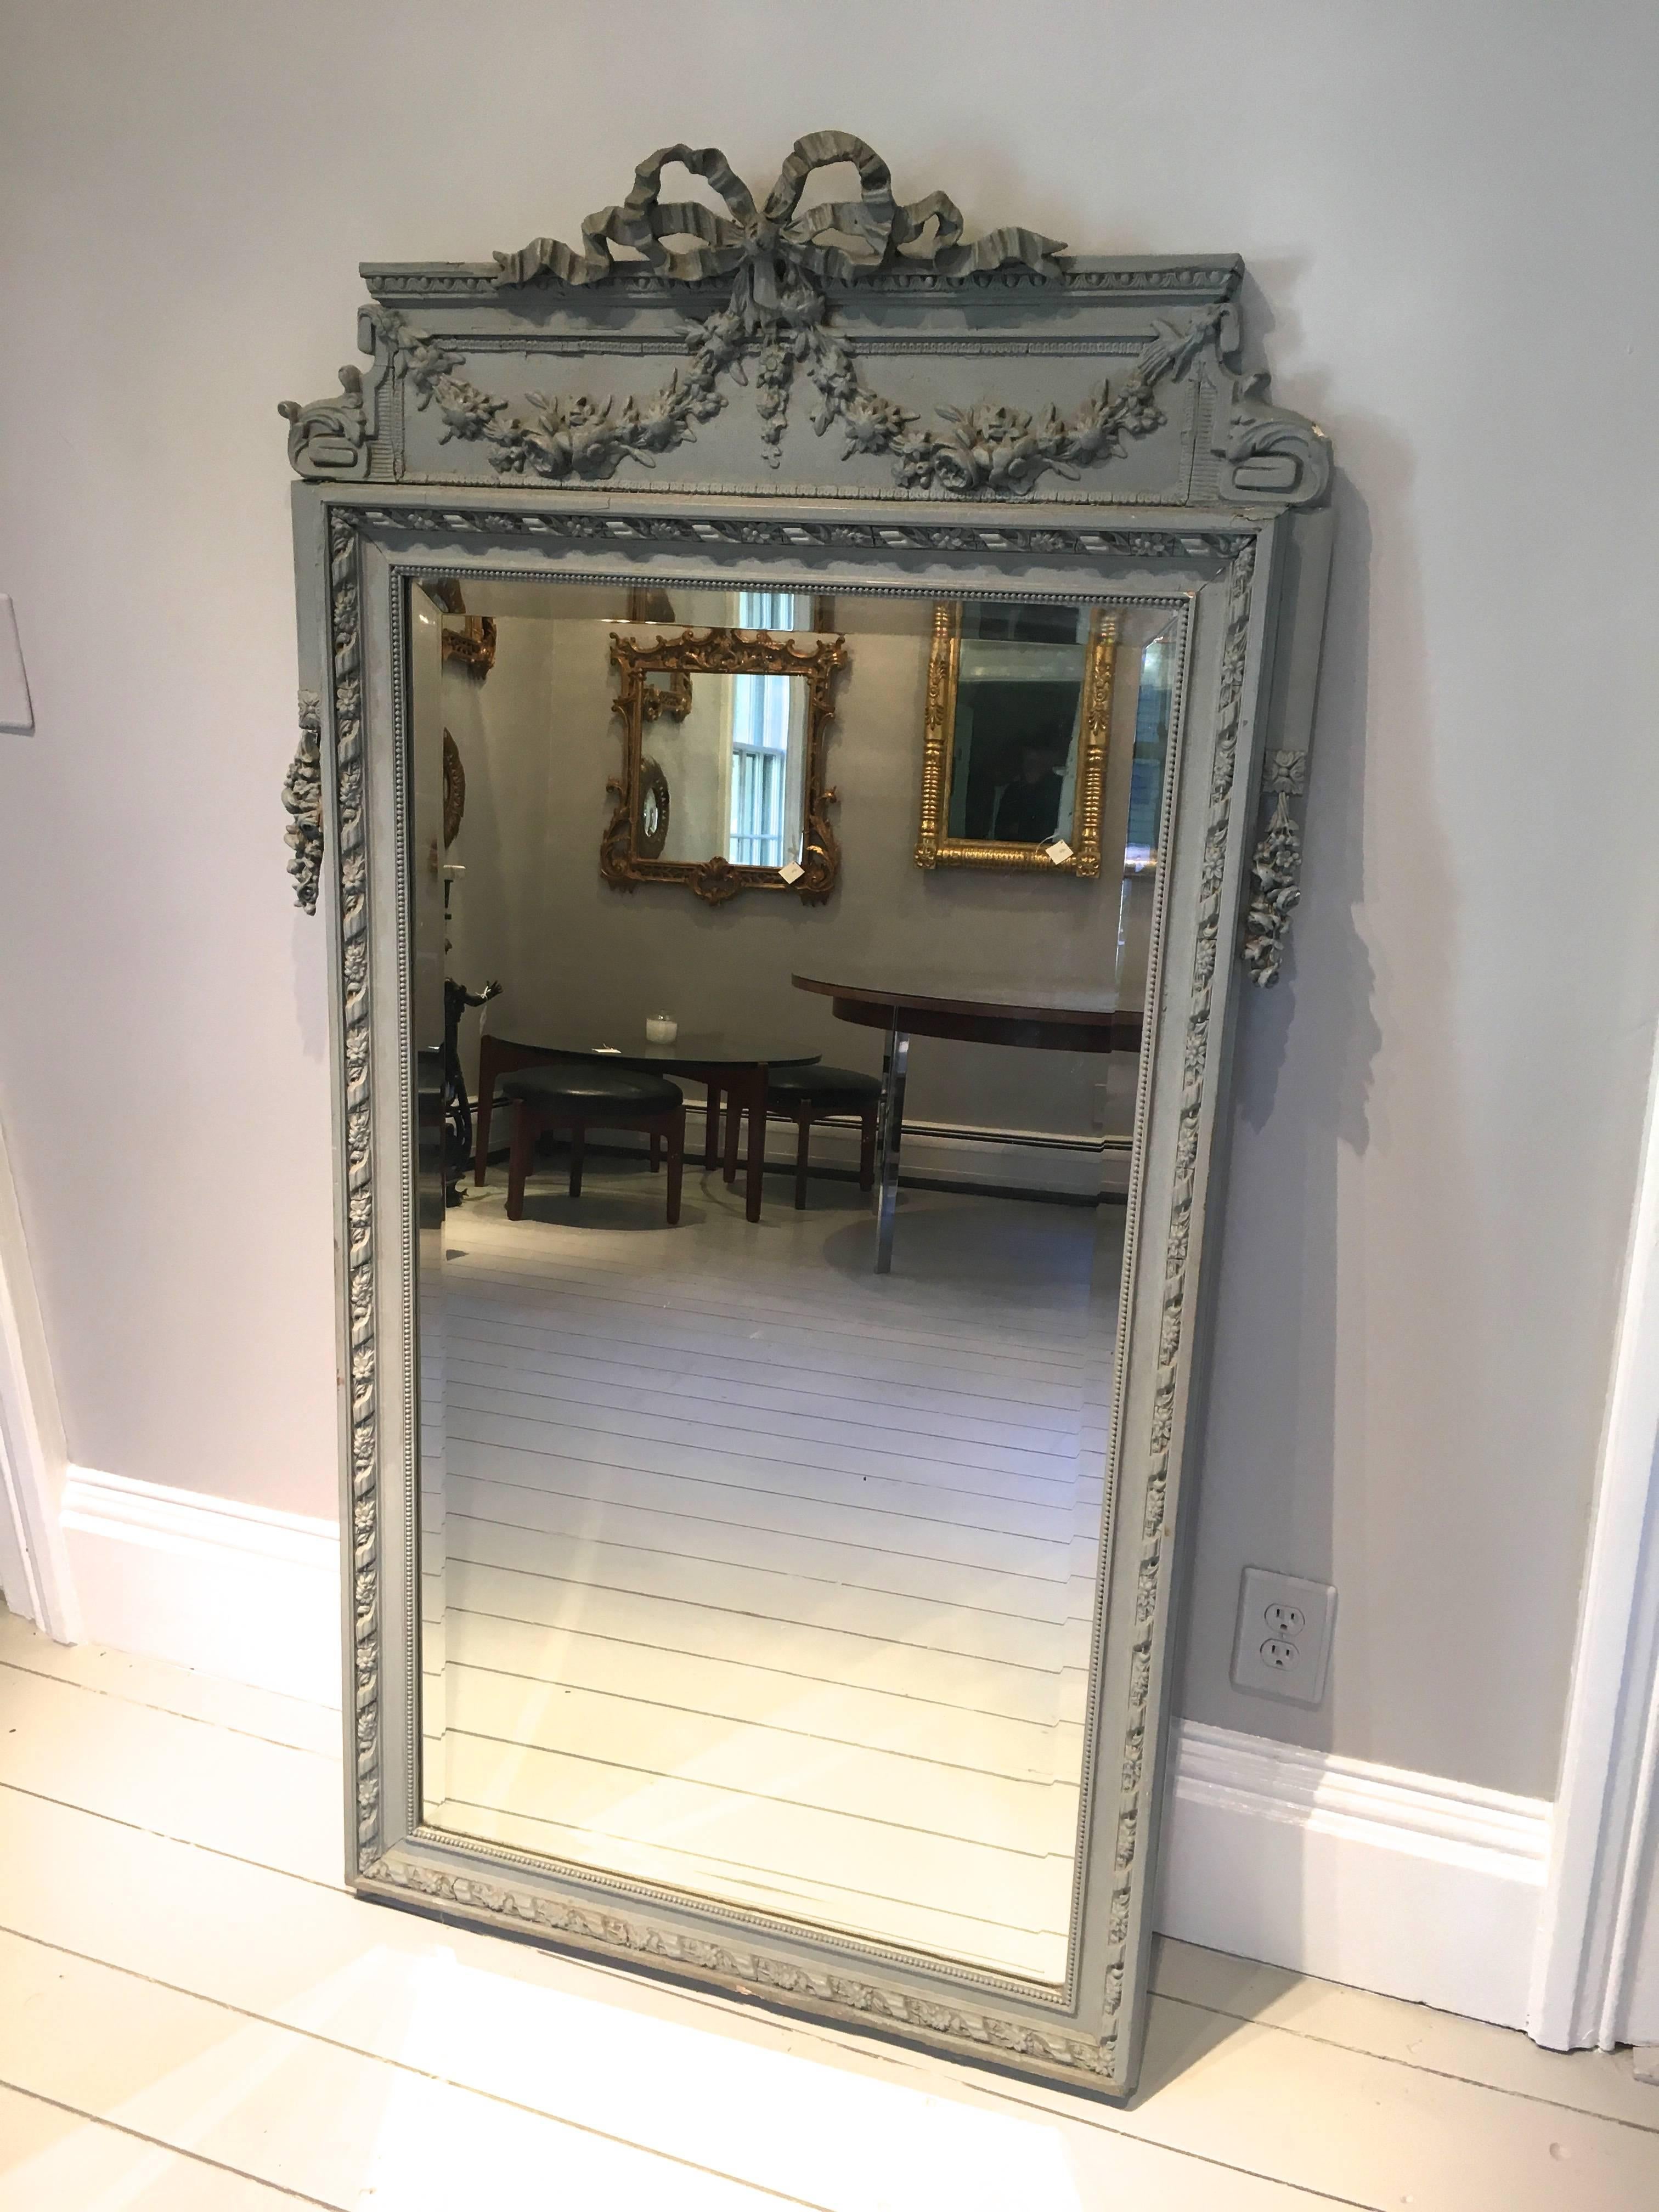 This Classic Beaux Arts French mirror is traditionally made from painted wood and gesso and features its original beveled mirror. There is a small amount of cracking to the paint and a few dings to the gesso, but overall, the mirror is in great